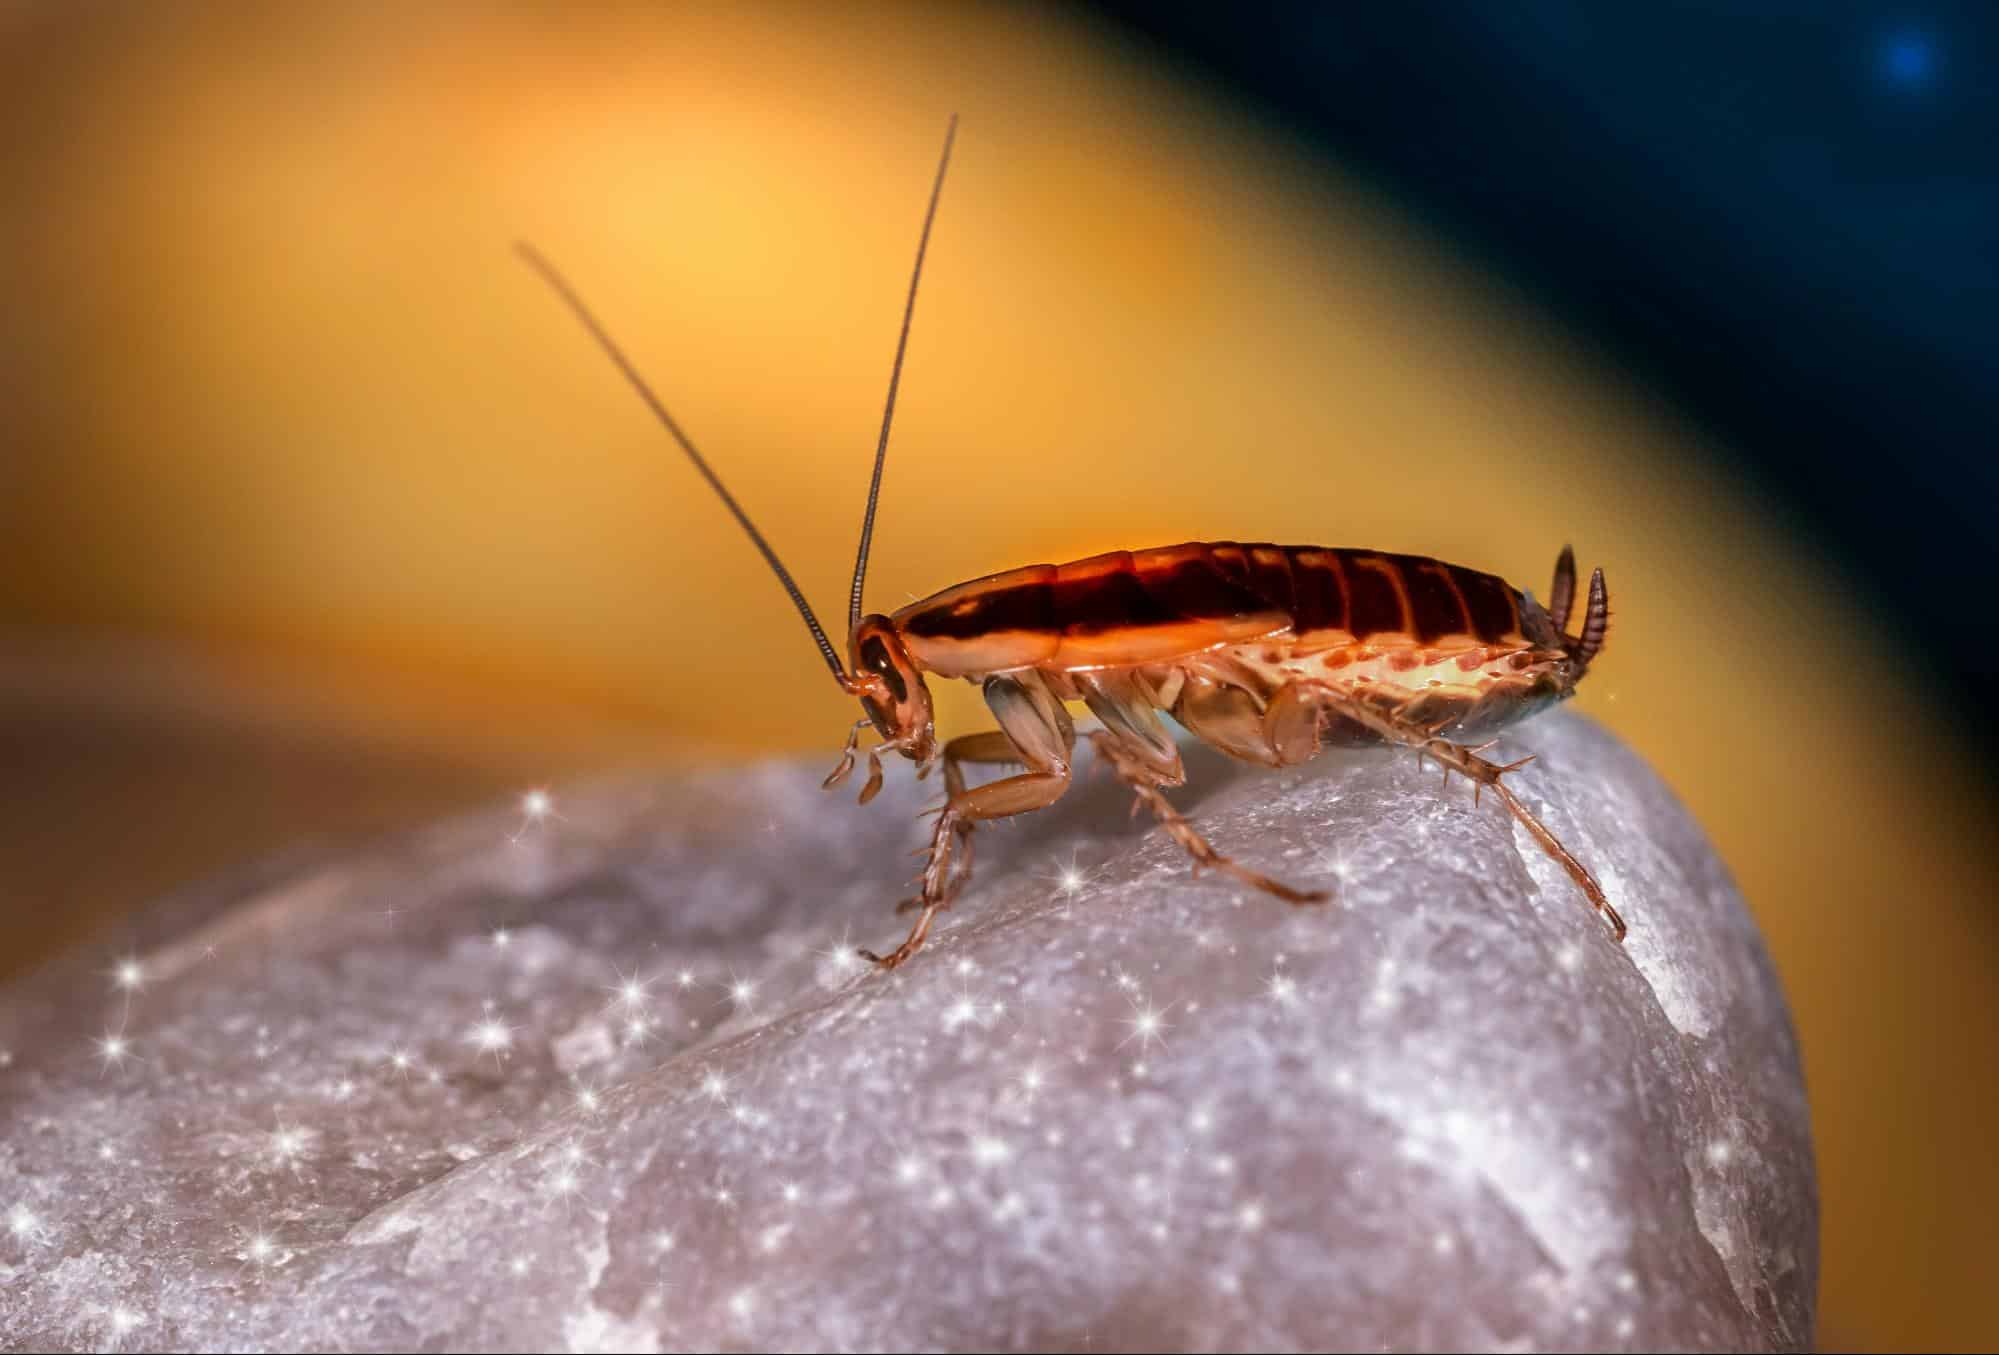 Can Pests Really Damage My Home?